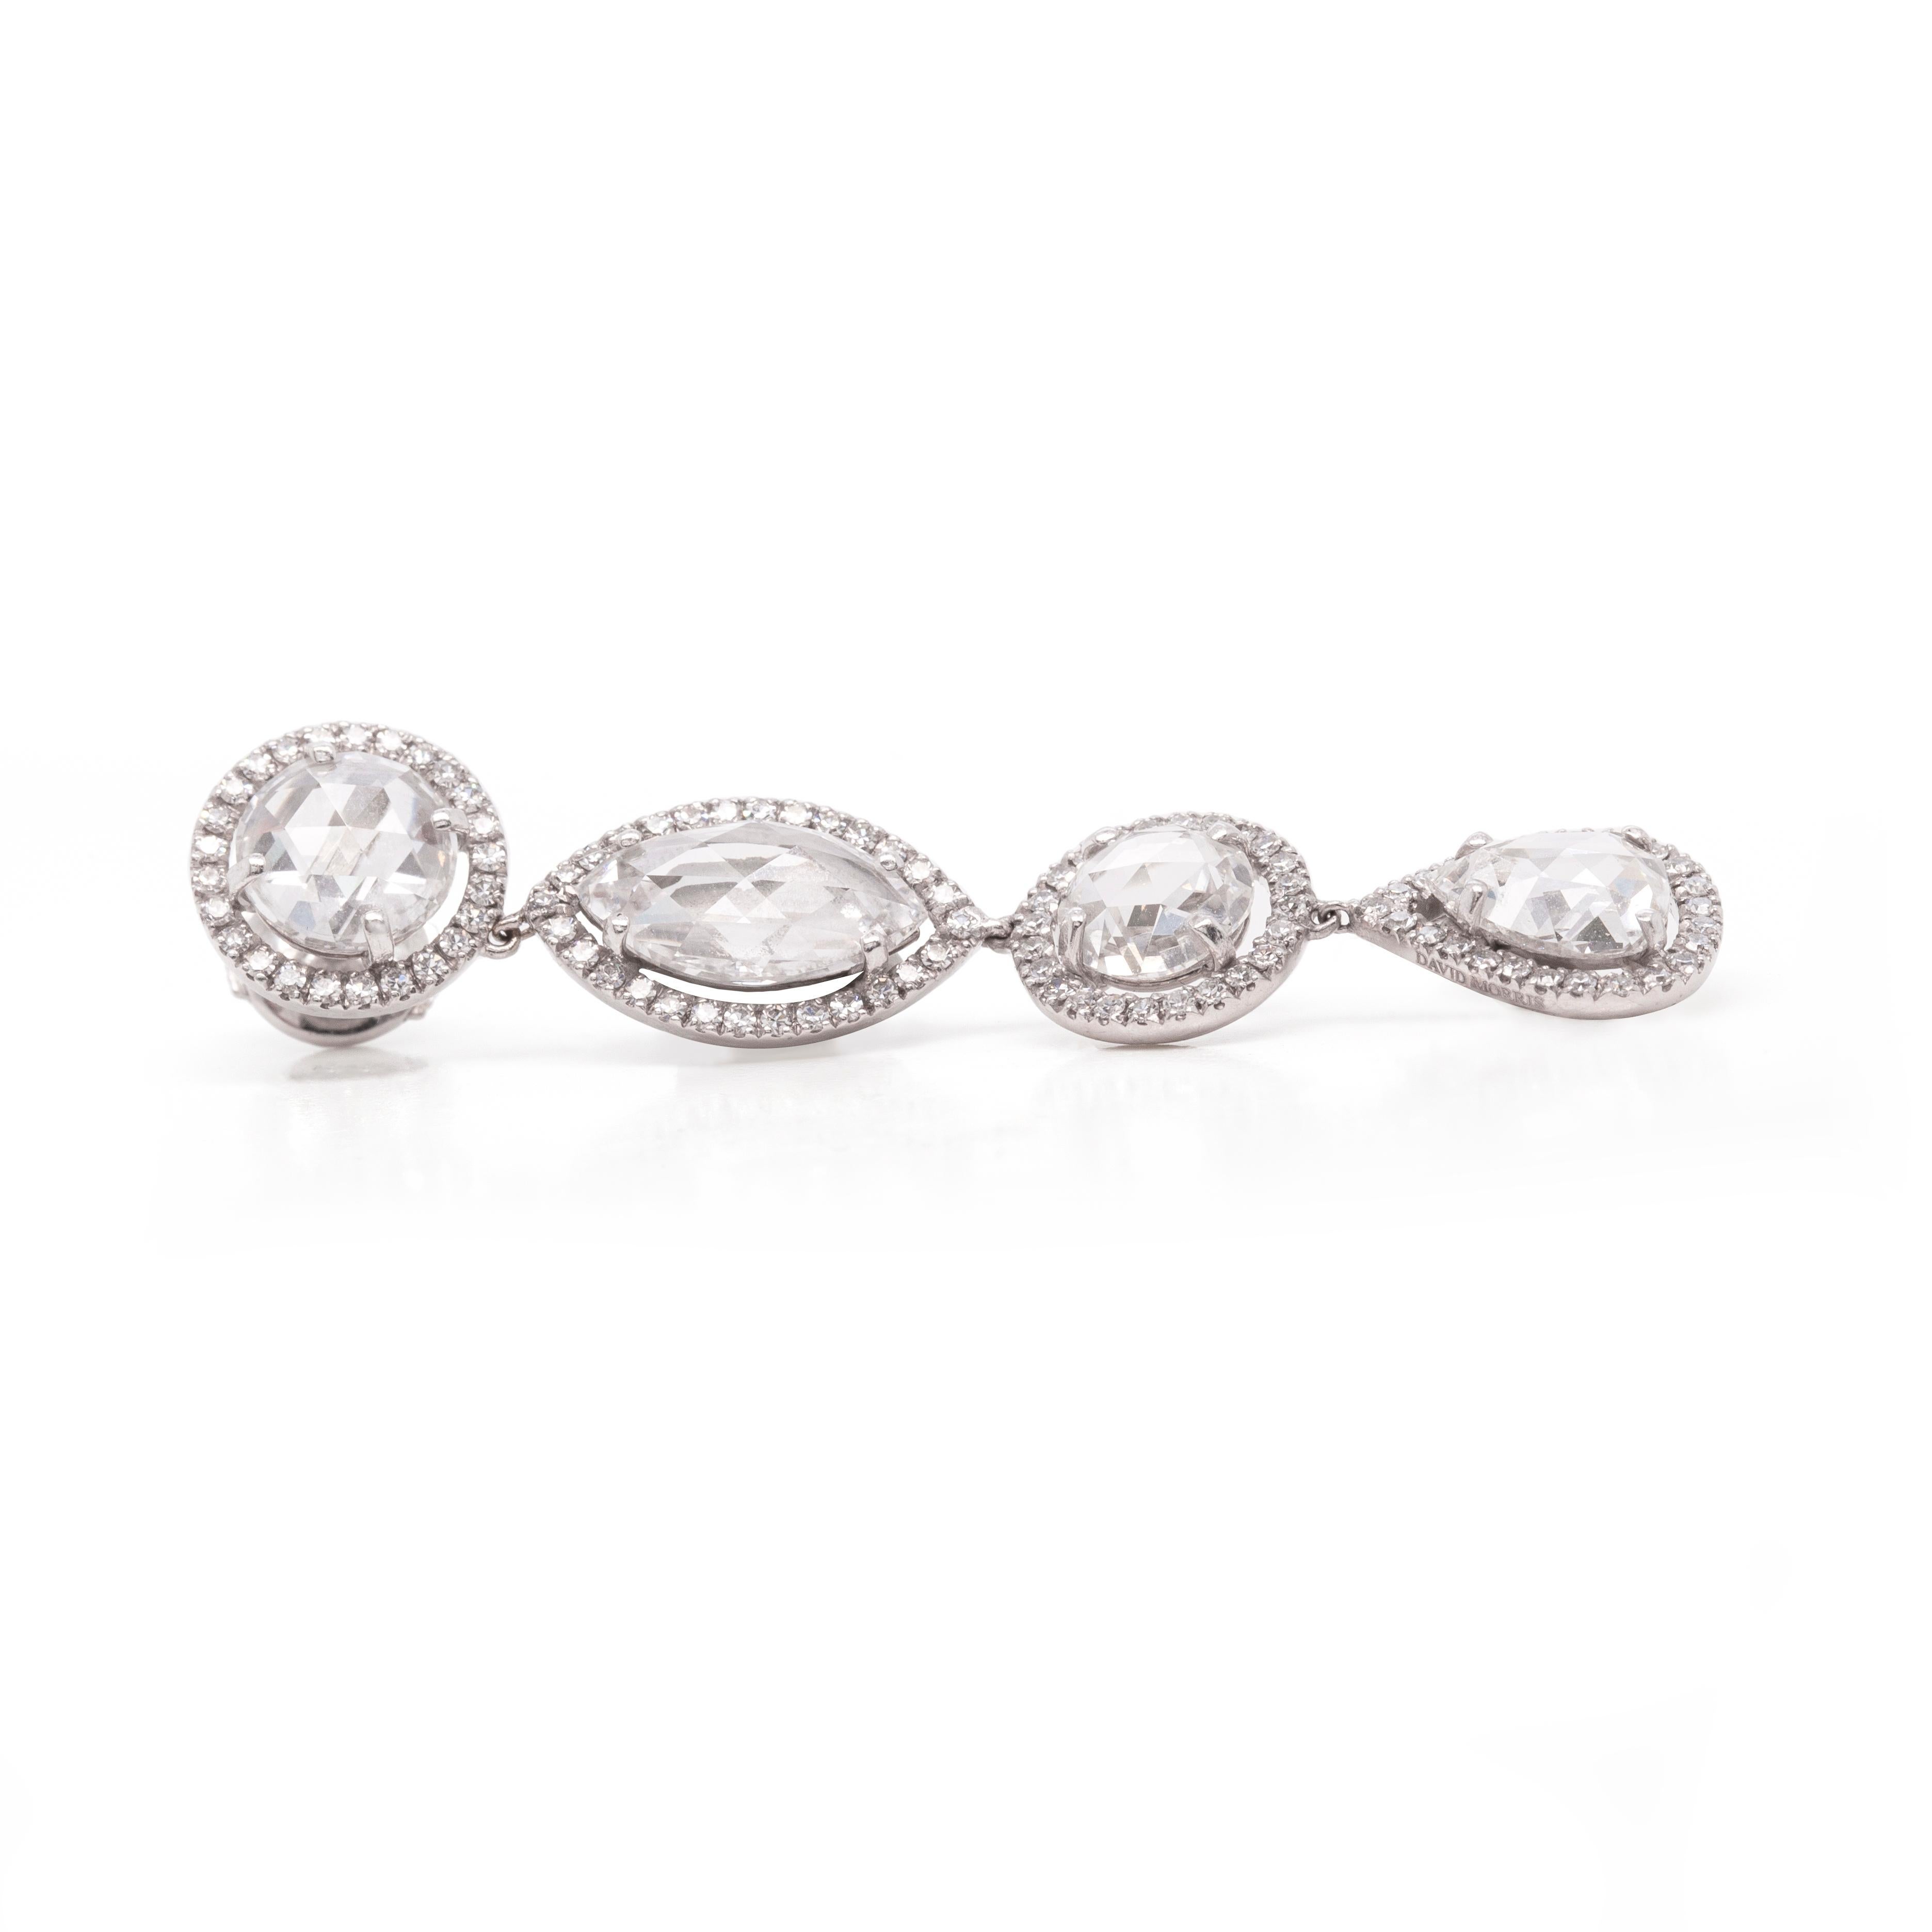 These stunning diamond David Morris earrings are a real showstopper. Four round rose cut, two marquis rose cut and two pear shape rose cut diamonds, all set in diamond halos,  total approximately 10 carats across the pair. These breathtaking